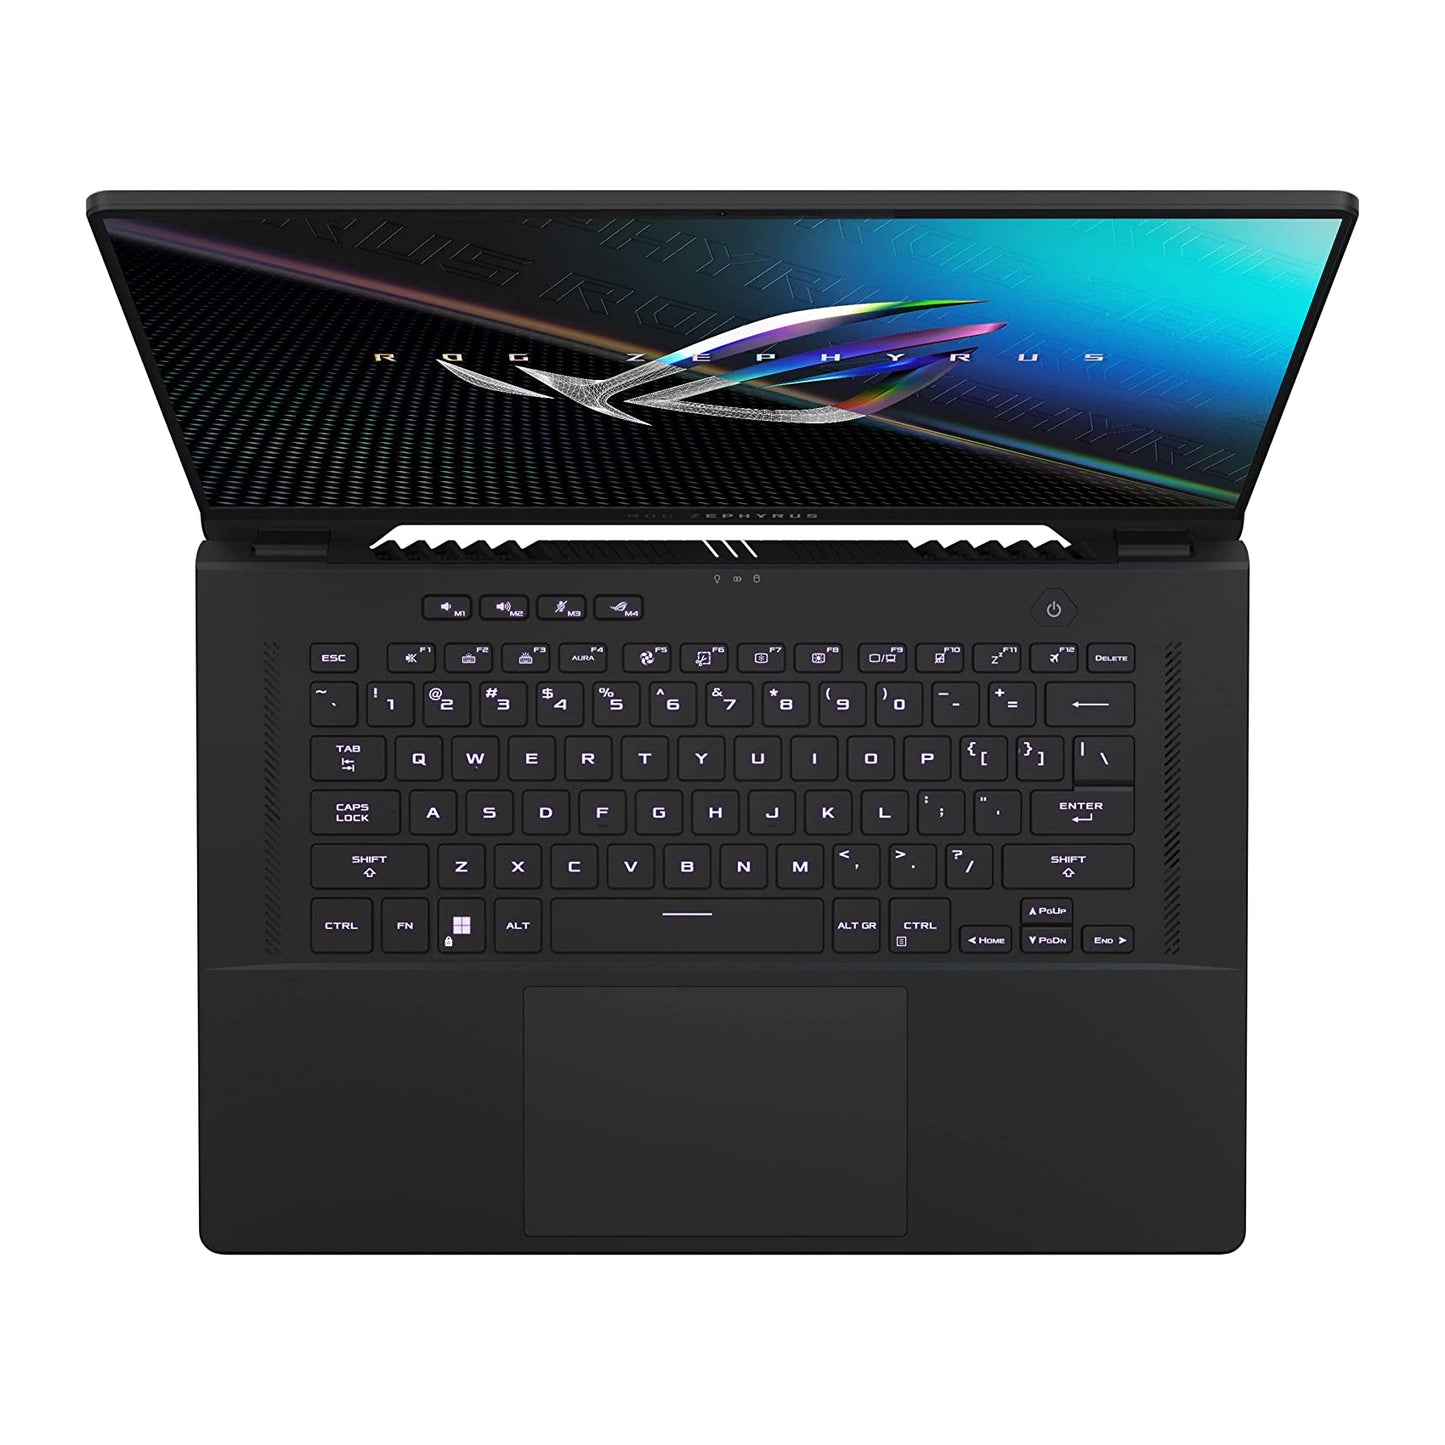 Asus Rog Zephyrus M16 GU603ZW Core i9-12900h Rtx 3070 Ti 165hz Qhd+ Gaming Laptop Offers (Brand New), Gaming laptop, Graphic Design laptop, best laptop for gaming, Best laptop for graphic design, computer for sale Lebanon, laptop for video editing in Lebanon, laptop for sale Lebanon, Best graphic design laptop,	Best video editing laptop, Best programming laptop, laptop for sale in Lebanon, laptops for sale in Lebanon, laptop for sale in Lebanon, buy computer Lebanon, buy laptop Lebanon.